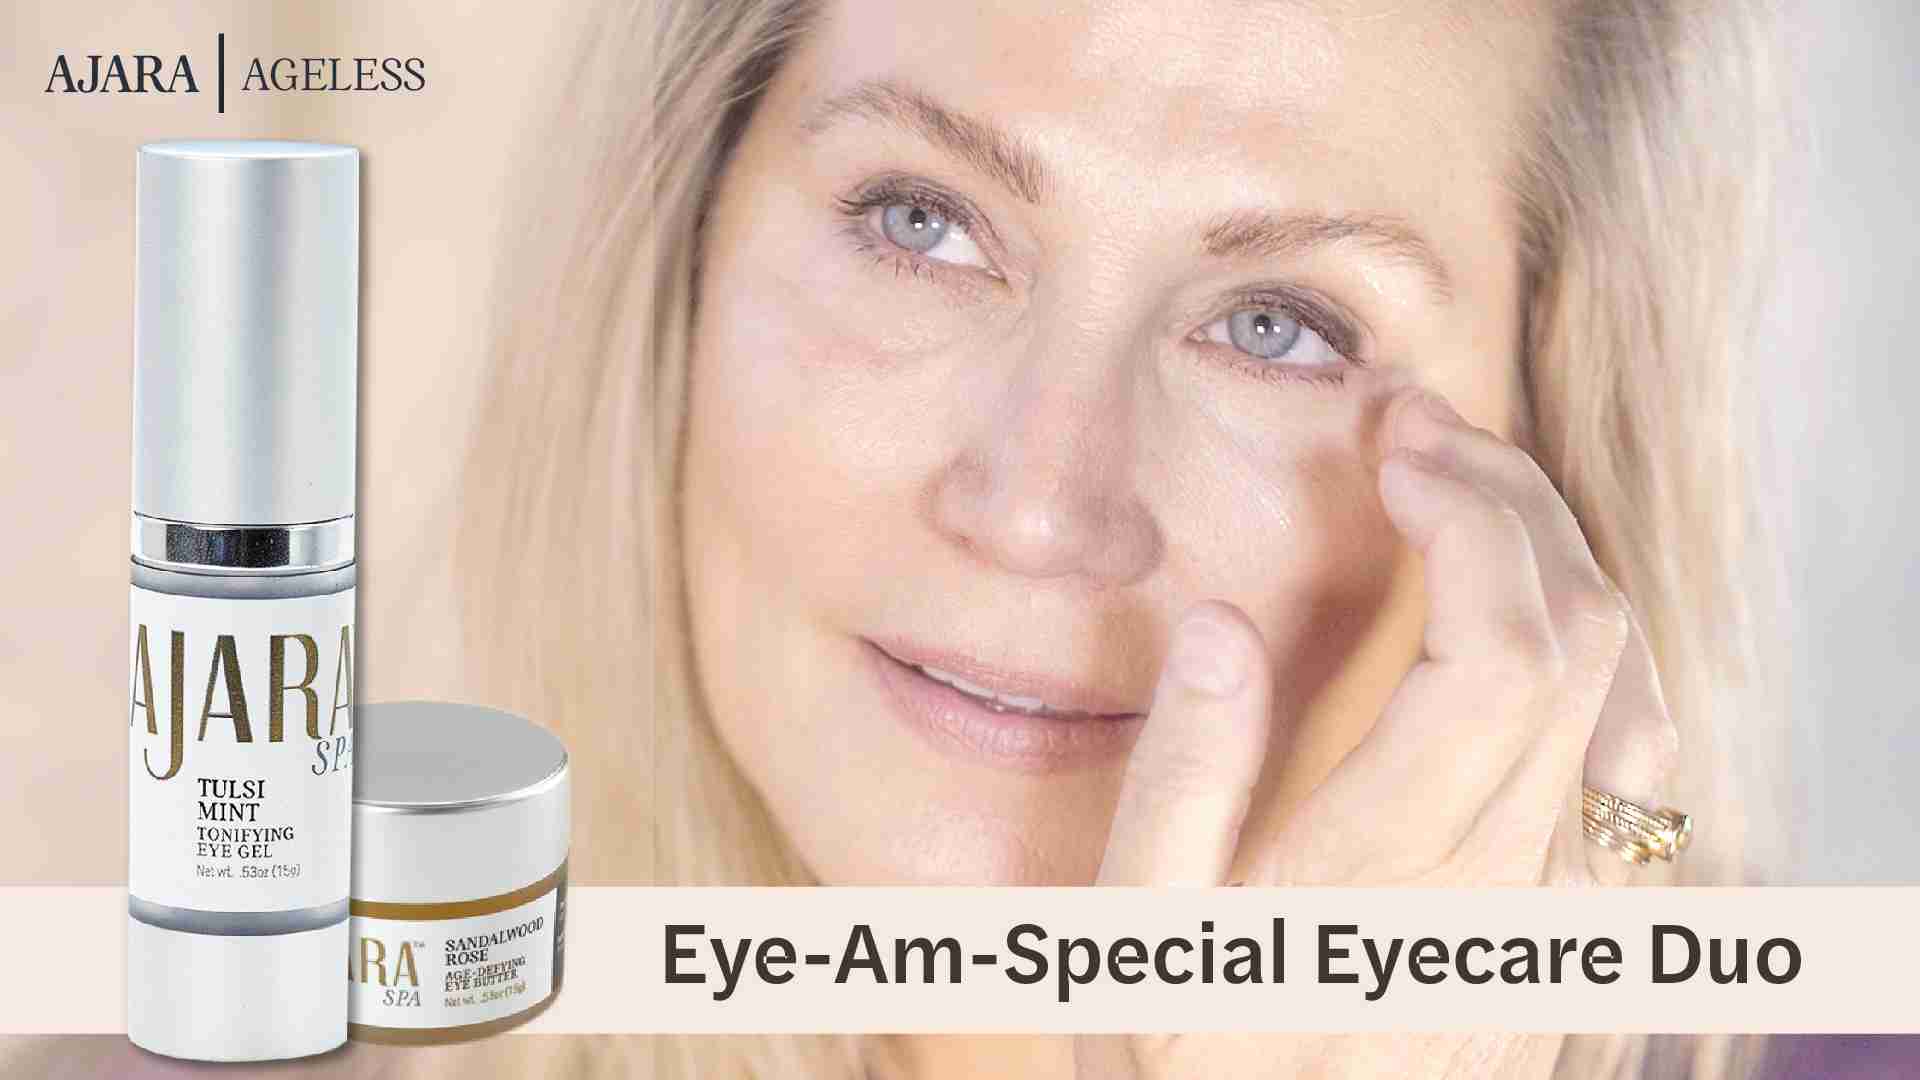 Eye-Am-Special Eyecare Duo